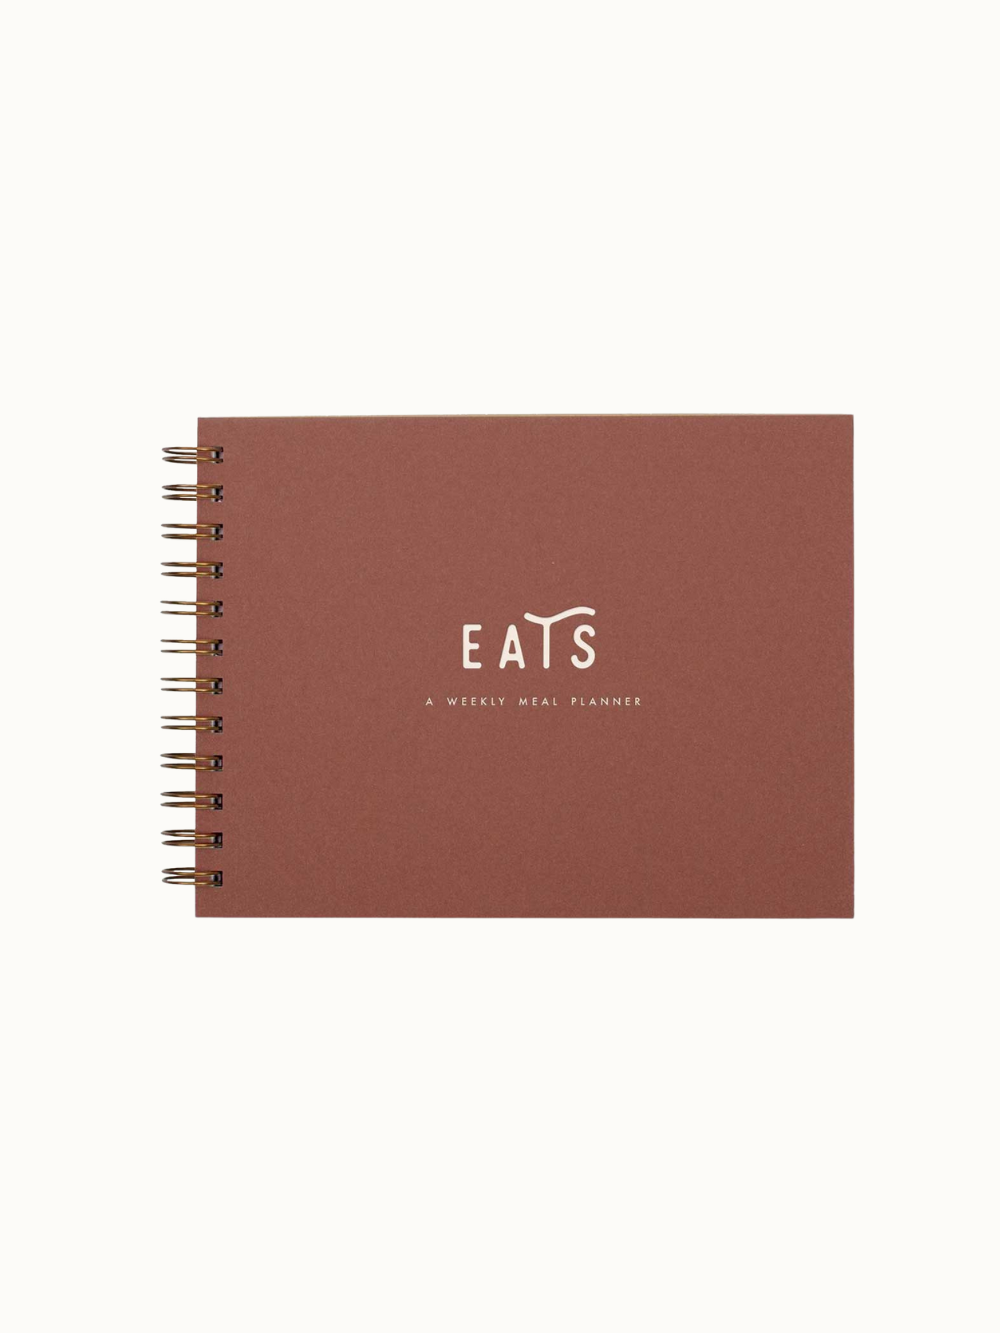 Eats - A simple meal planner. 60 meal planning pages. Terracotta cover with off white ink and a gold wire binding. 